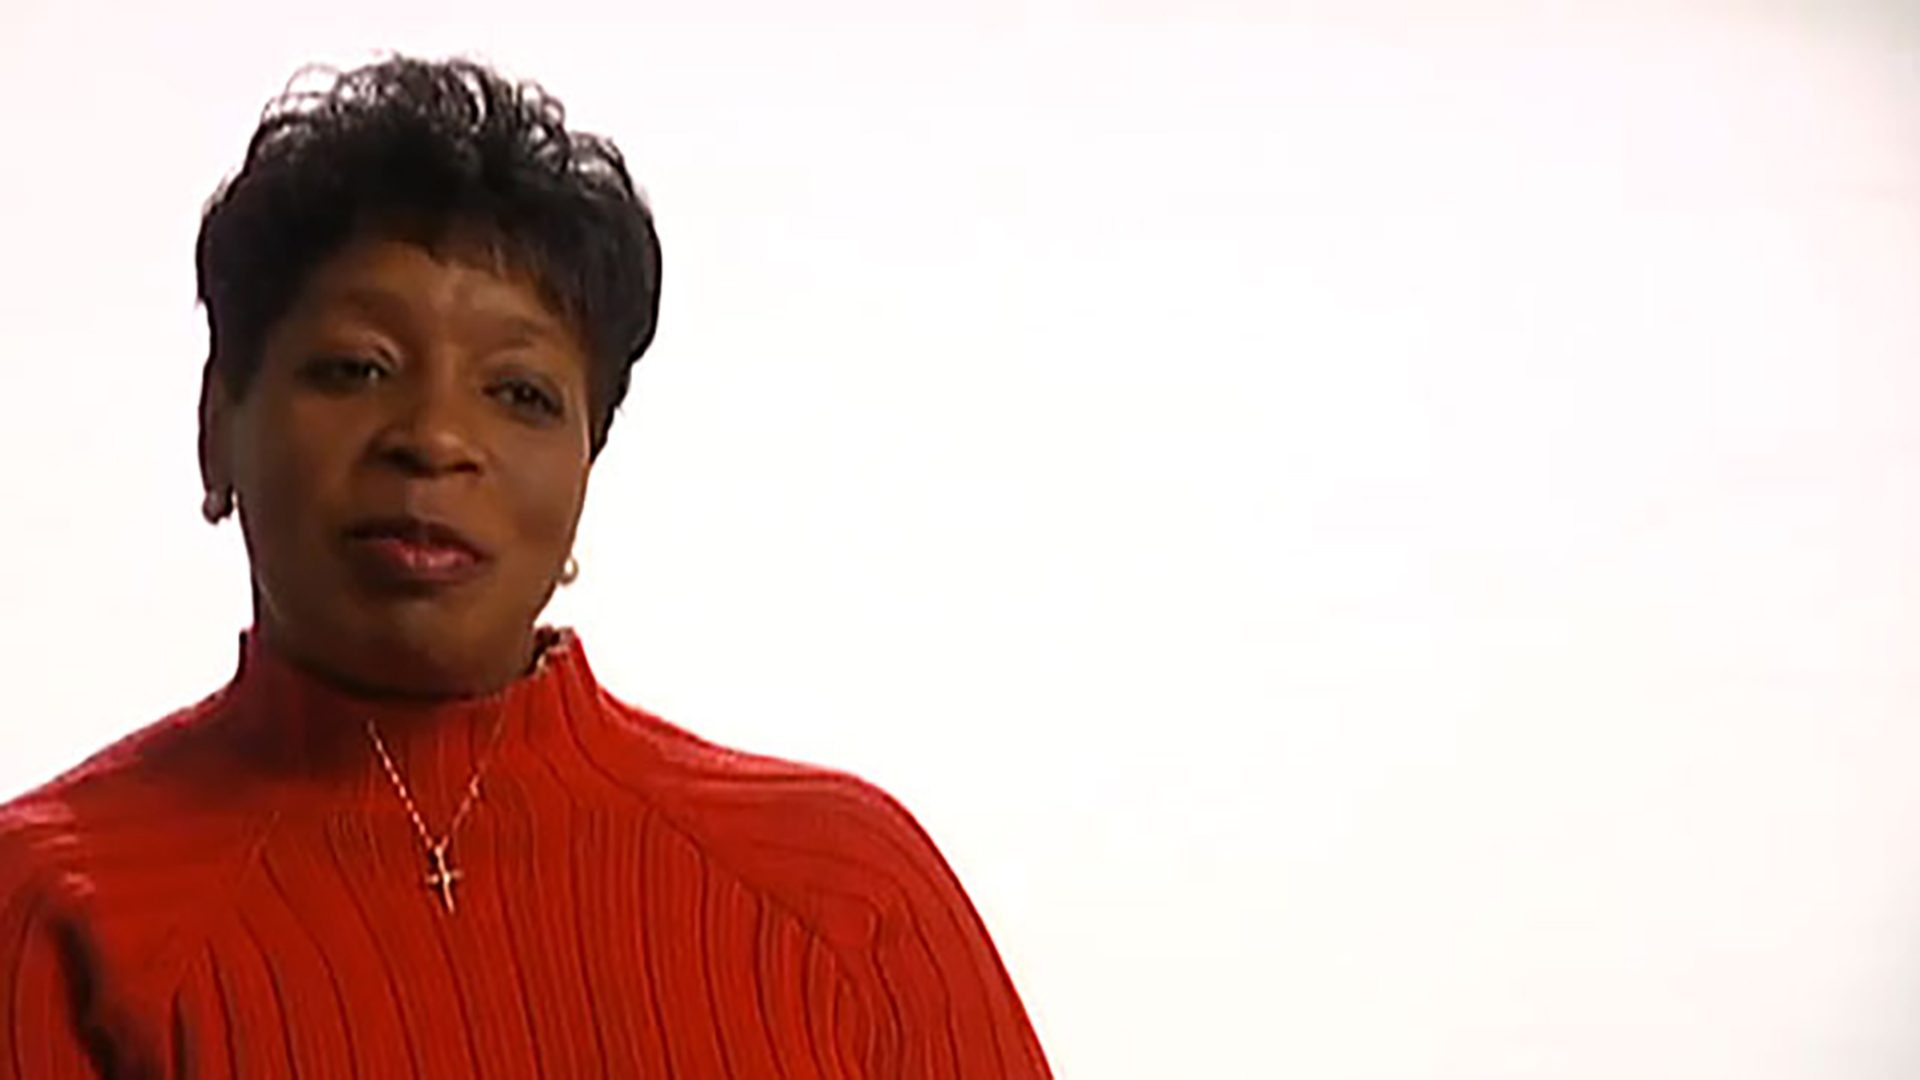 A middle aged woman with short black hair wearing a red turtleneck is interviewed against a white background